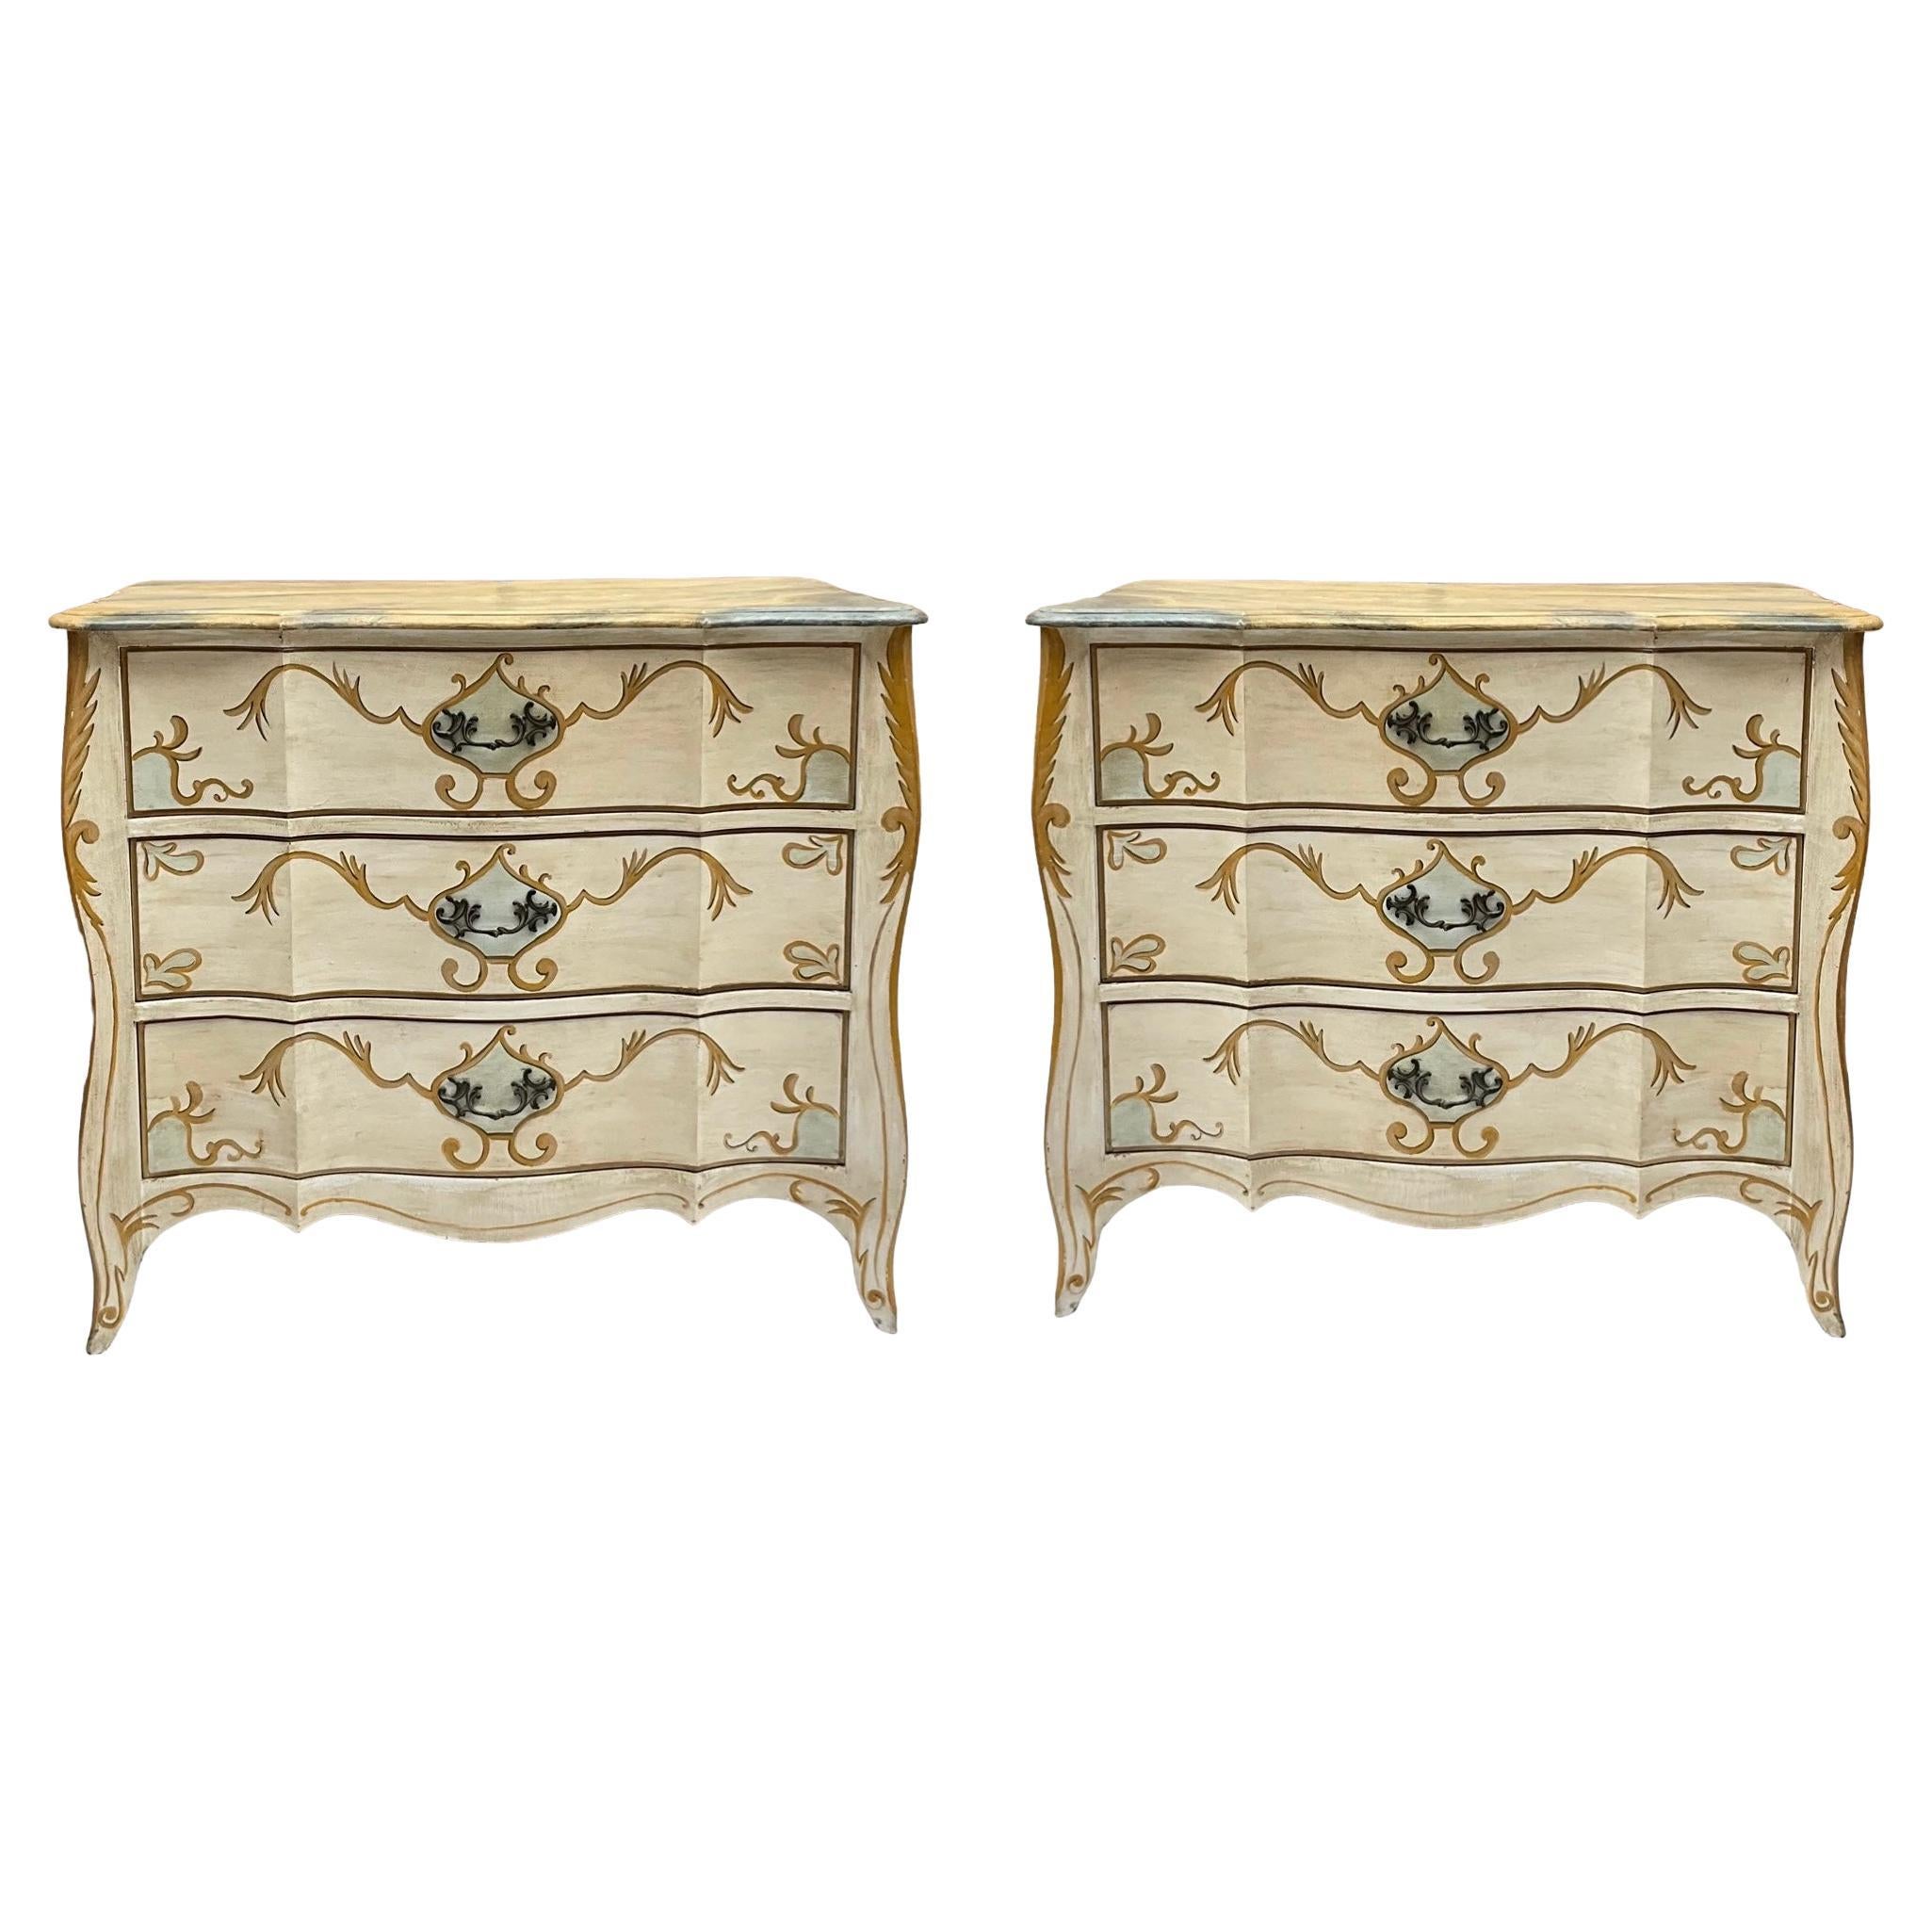 Italian Chests / Commodes W/ French Styling & Faux Marble Painted Tops - Pair